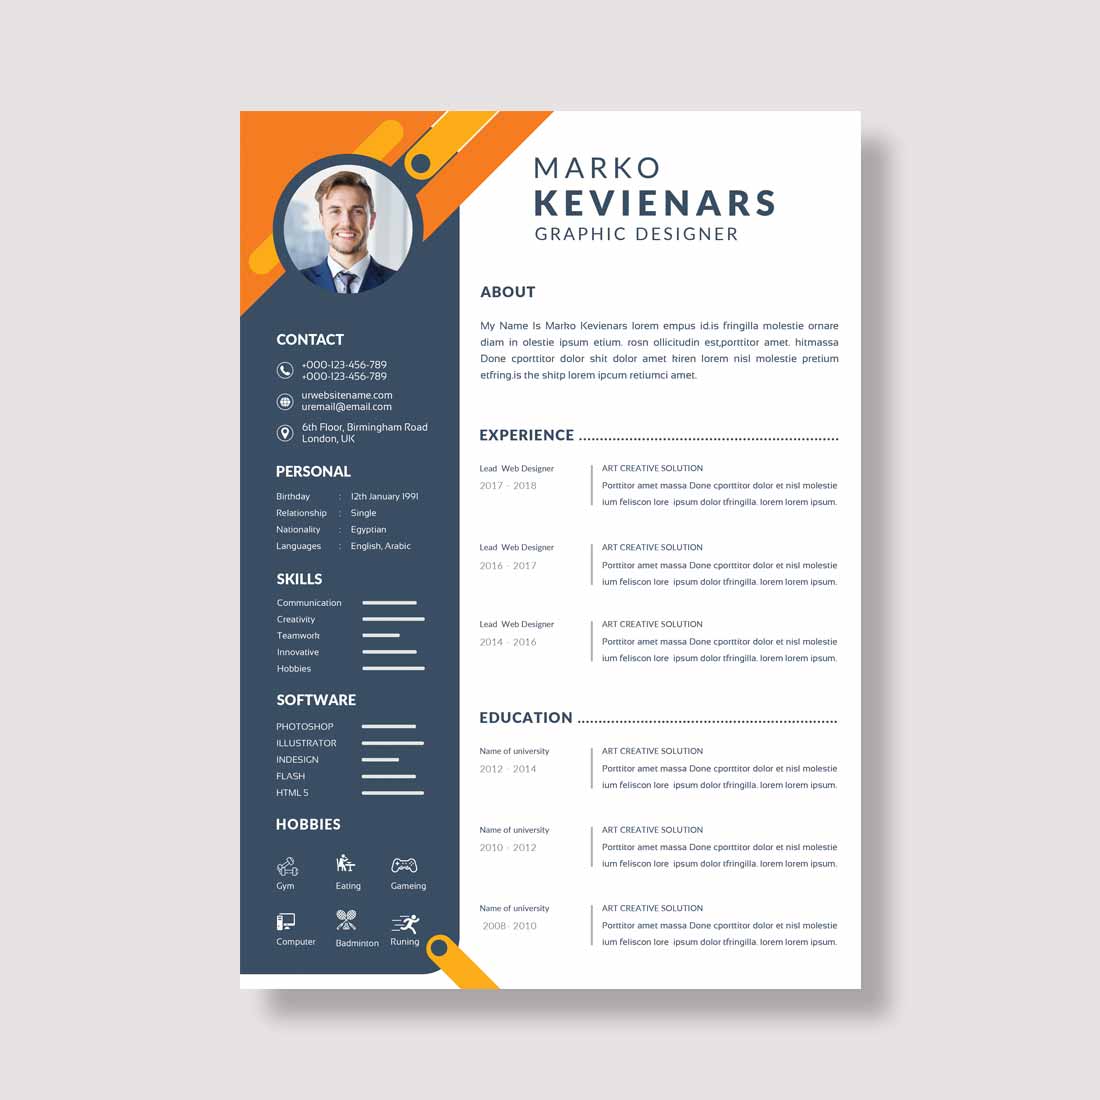 Professional resume template for a graphic designer.